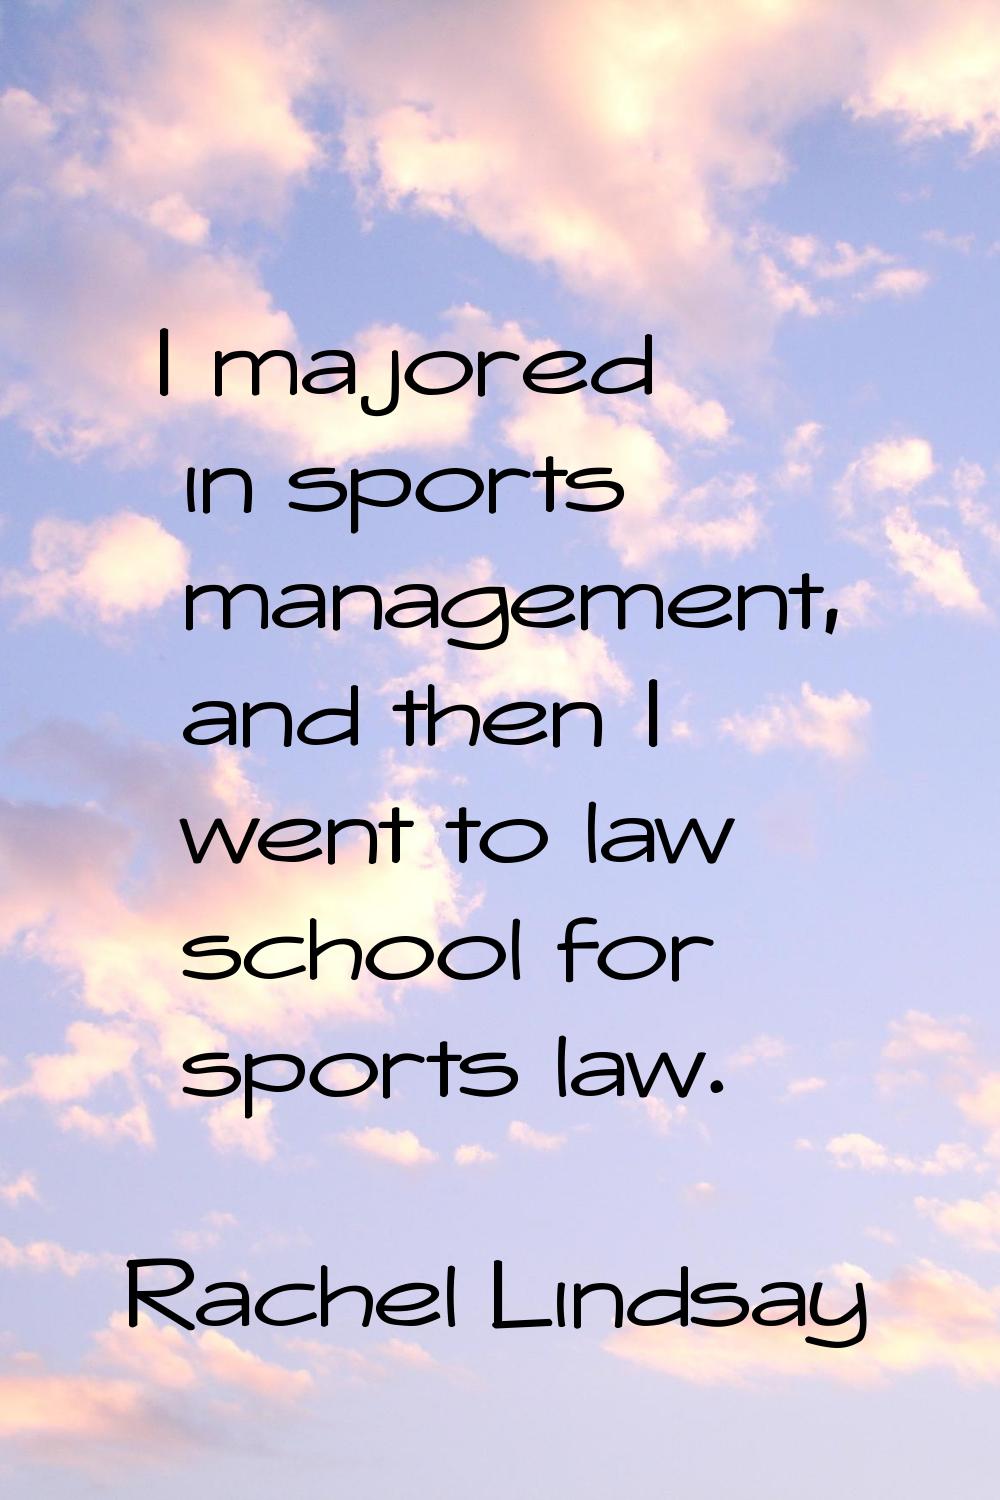 I majored in sports management, and then I went to law school for sports law.